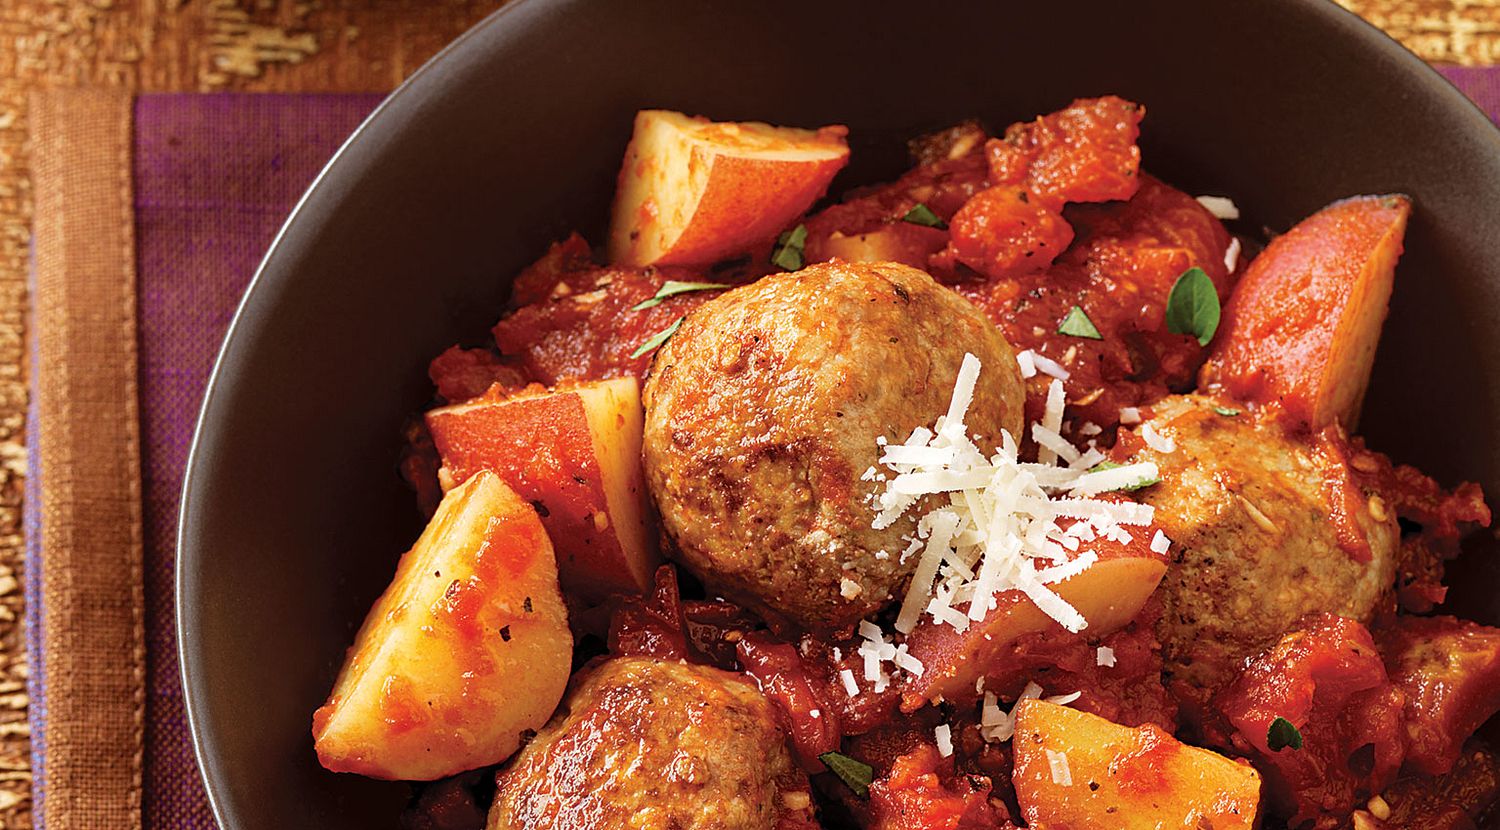 Saucy Skillet Meatballs and Potatoes